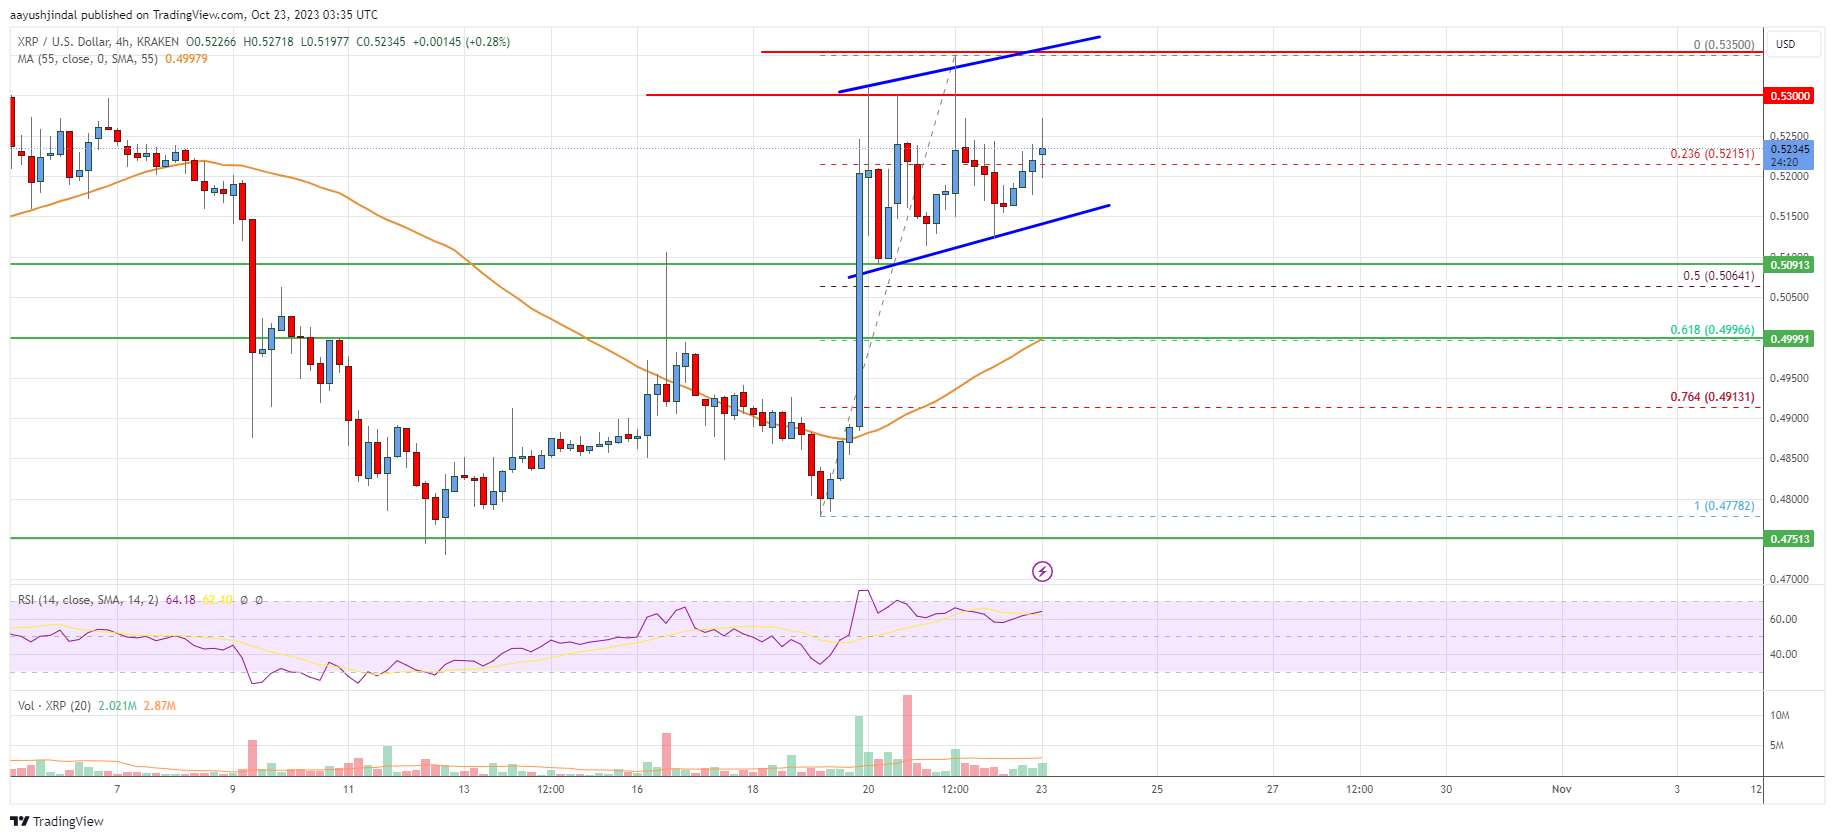 XRP Price Analysis: Bitcoin Could Lead XRP Higher To $0.580